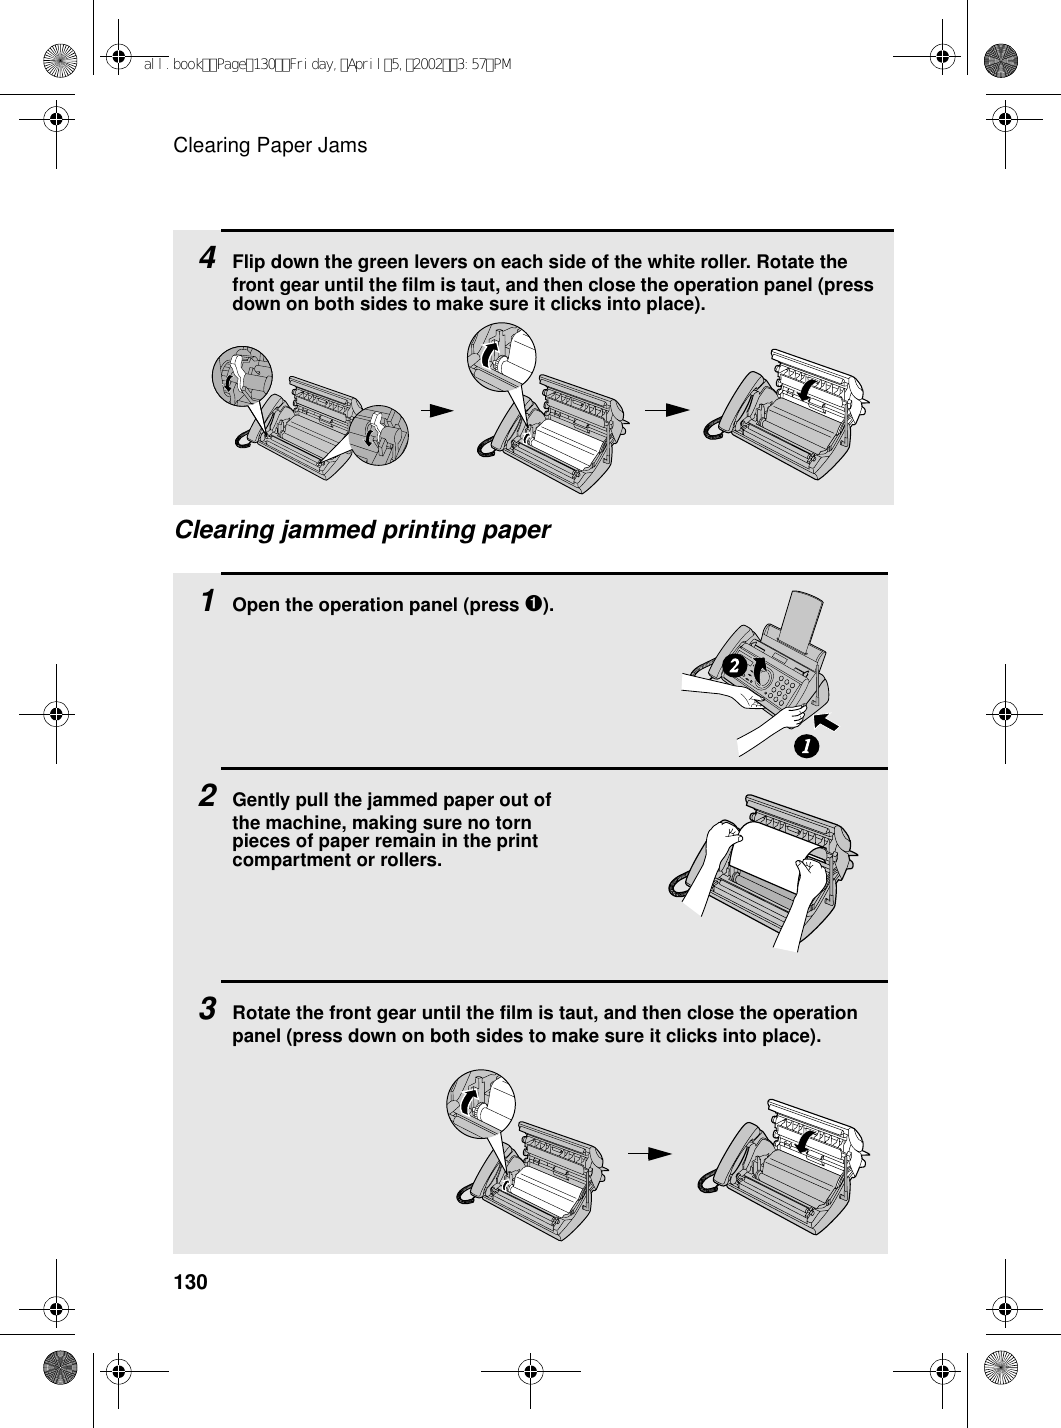 Clearing Paper Jams1301Open the operation panel (press ➊).2Gently pull the jammed paper out of the machine, making sure no torn pieces of paper remain in the print compartment or rollers.3Rotate the front gear until the film is taut, and then close the operation panel (press down on both sides to make sure it clicks into place).Clearing jammed printing paper4Flip down the green levers on each side of the white roller. Rotate the front gear until the film is taut, and then close the operation panel (press down on both sides to make sure it clicks into place).12all.bookPage130Friday,April5,20023:57PM